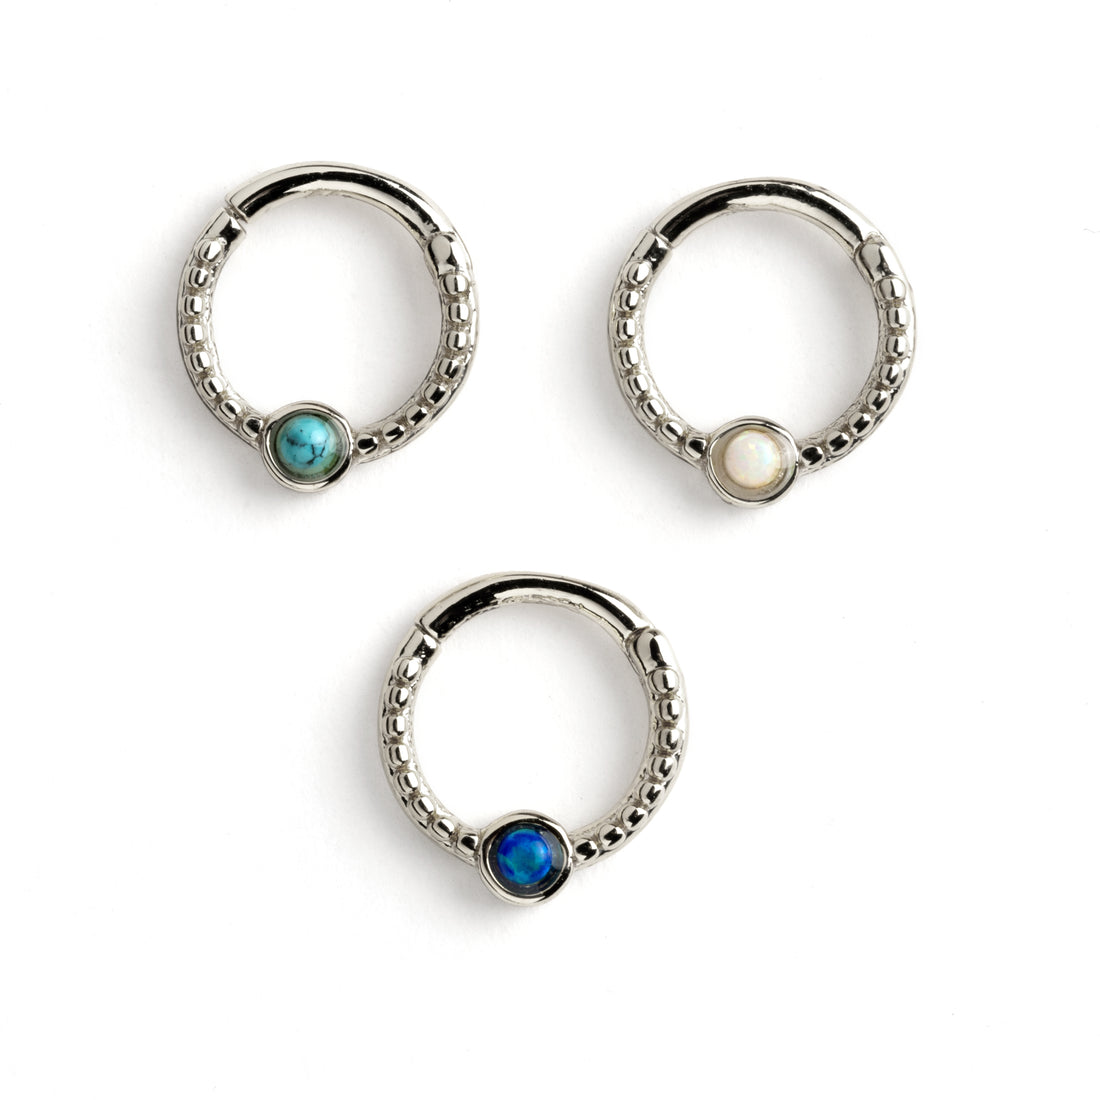 Dayaa surgical steel septum clicker with blue opal, white opal and turquoise frontal view